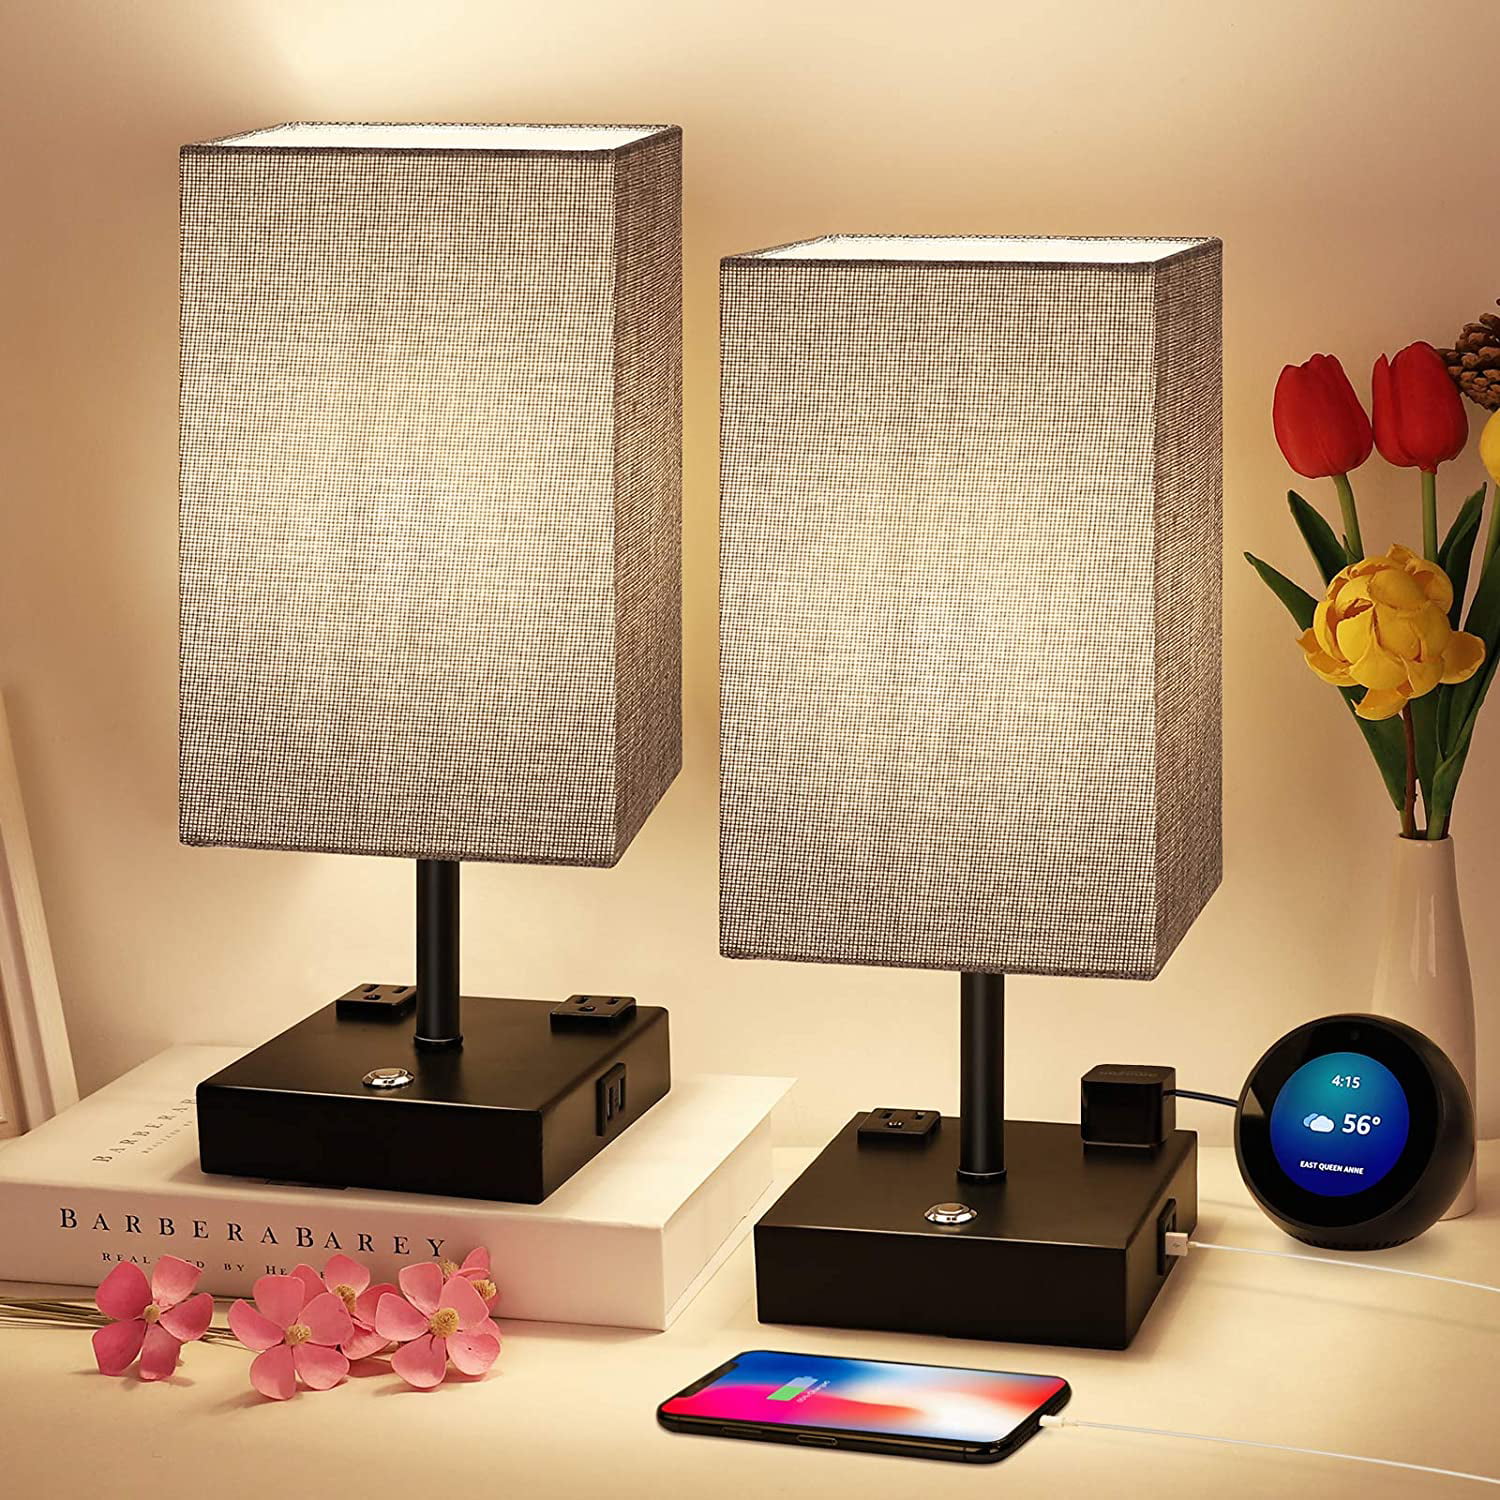 Touch Sensor Bedside Lamps Portable Nightstand Lamp for Bedrooms with Fabric Lamp Shade and 4W LED Bulb Kohree USB Bedside Table Lamp Fully Dimmable & Low Voltage DC 5V 